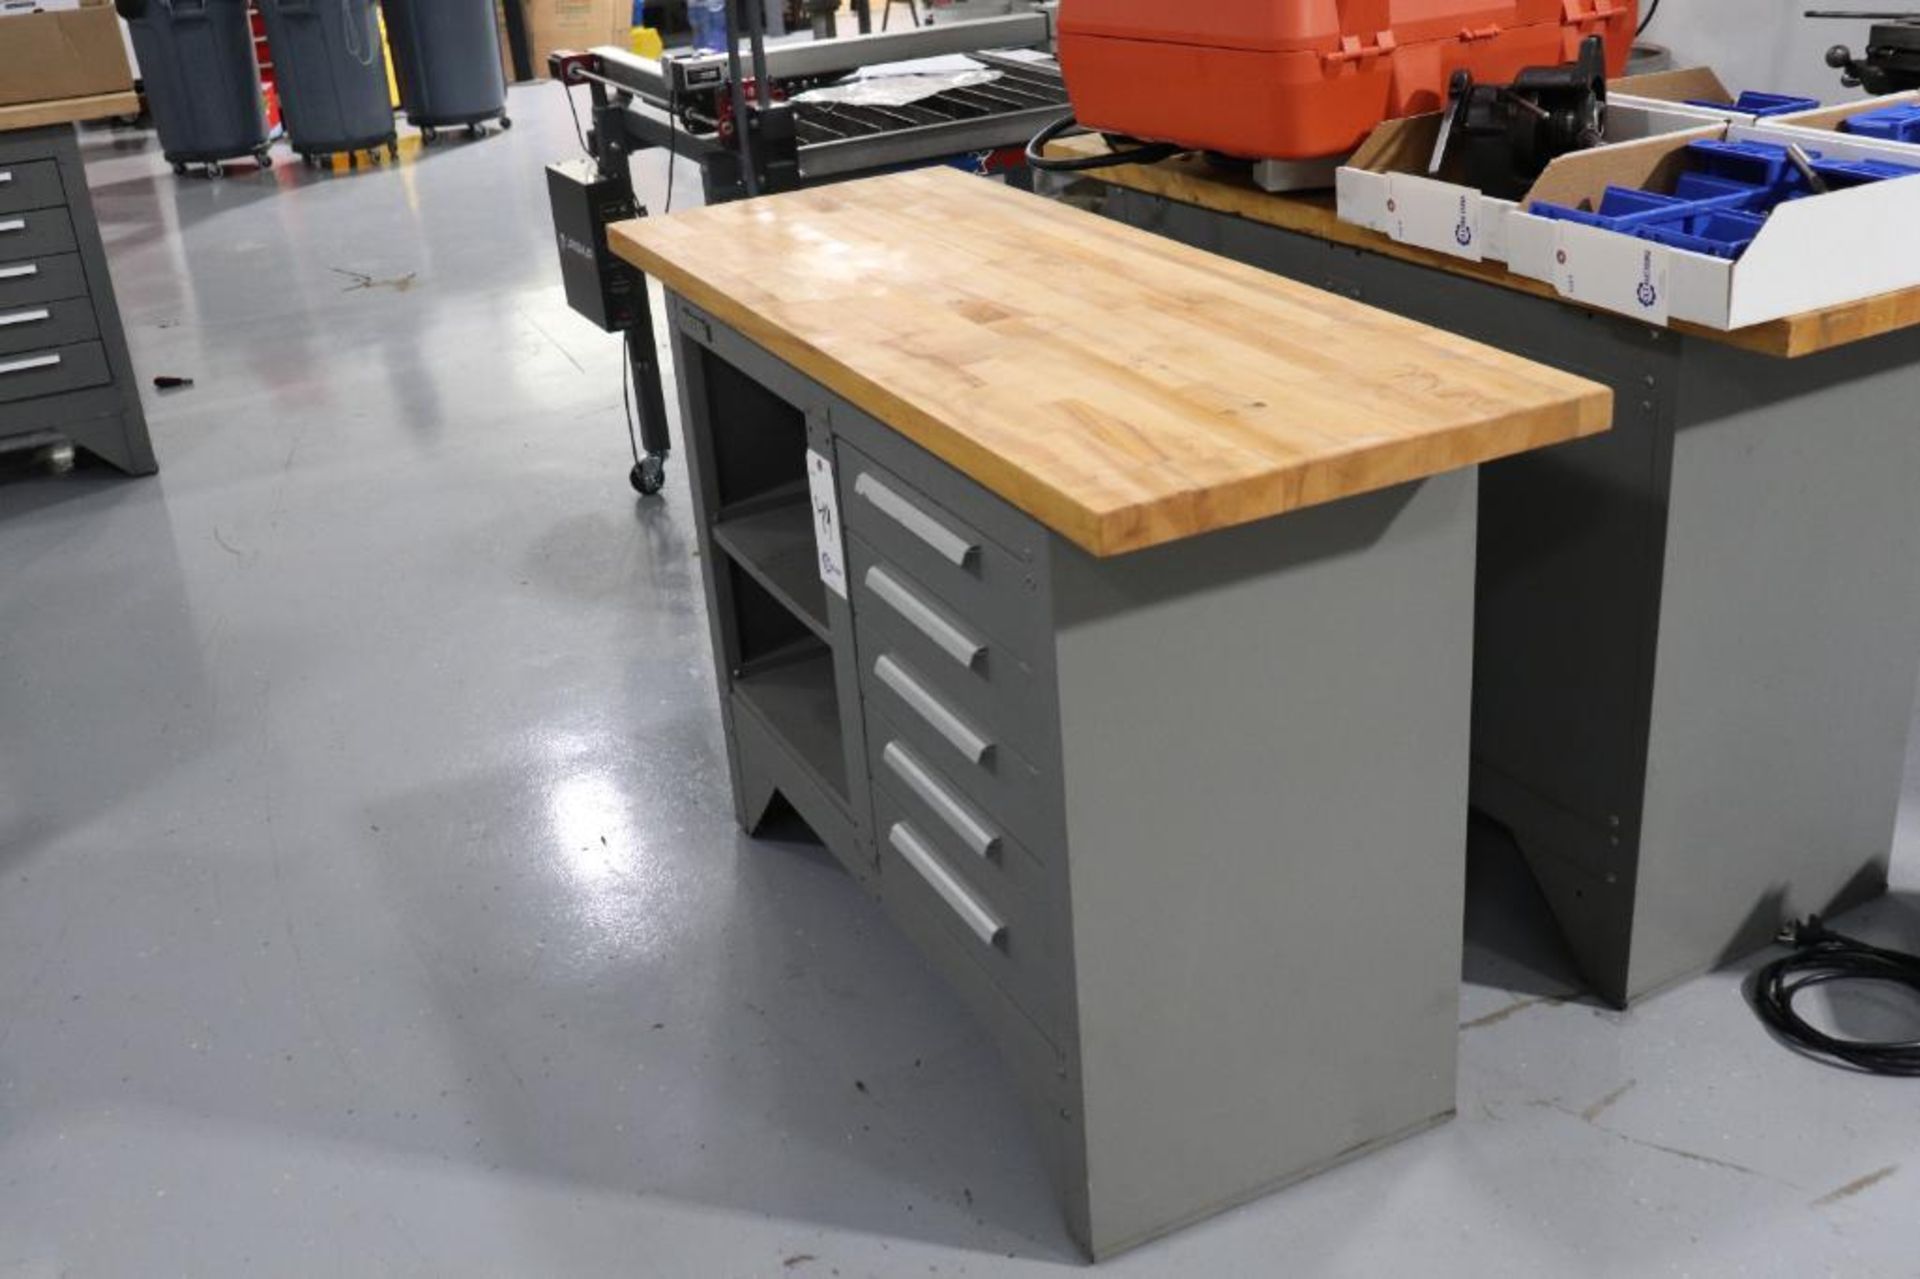 Kennedy work bench - Image 2 of 7